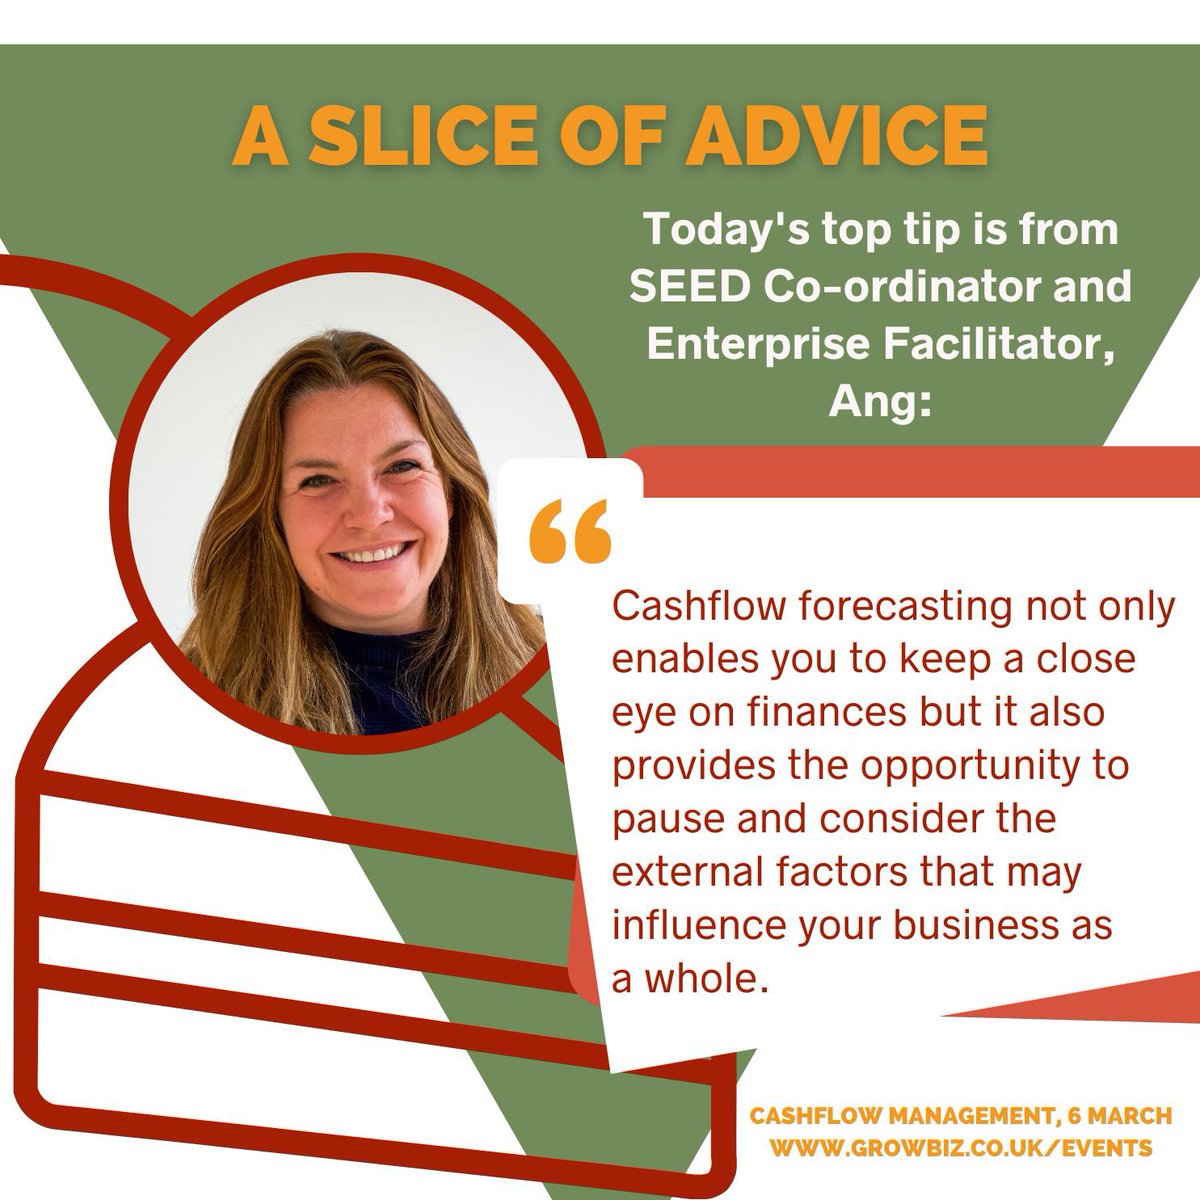 What is a cashflow and do you need one to run your #rural business? Team member Ang gives a couple of reasons why this is critical here—come along to our Cashflow Management session on #Wednesday to discover more & look at a variety of things that can help you know your numbers.